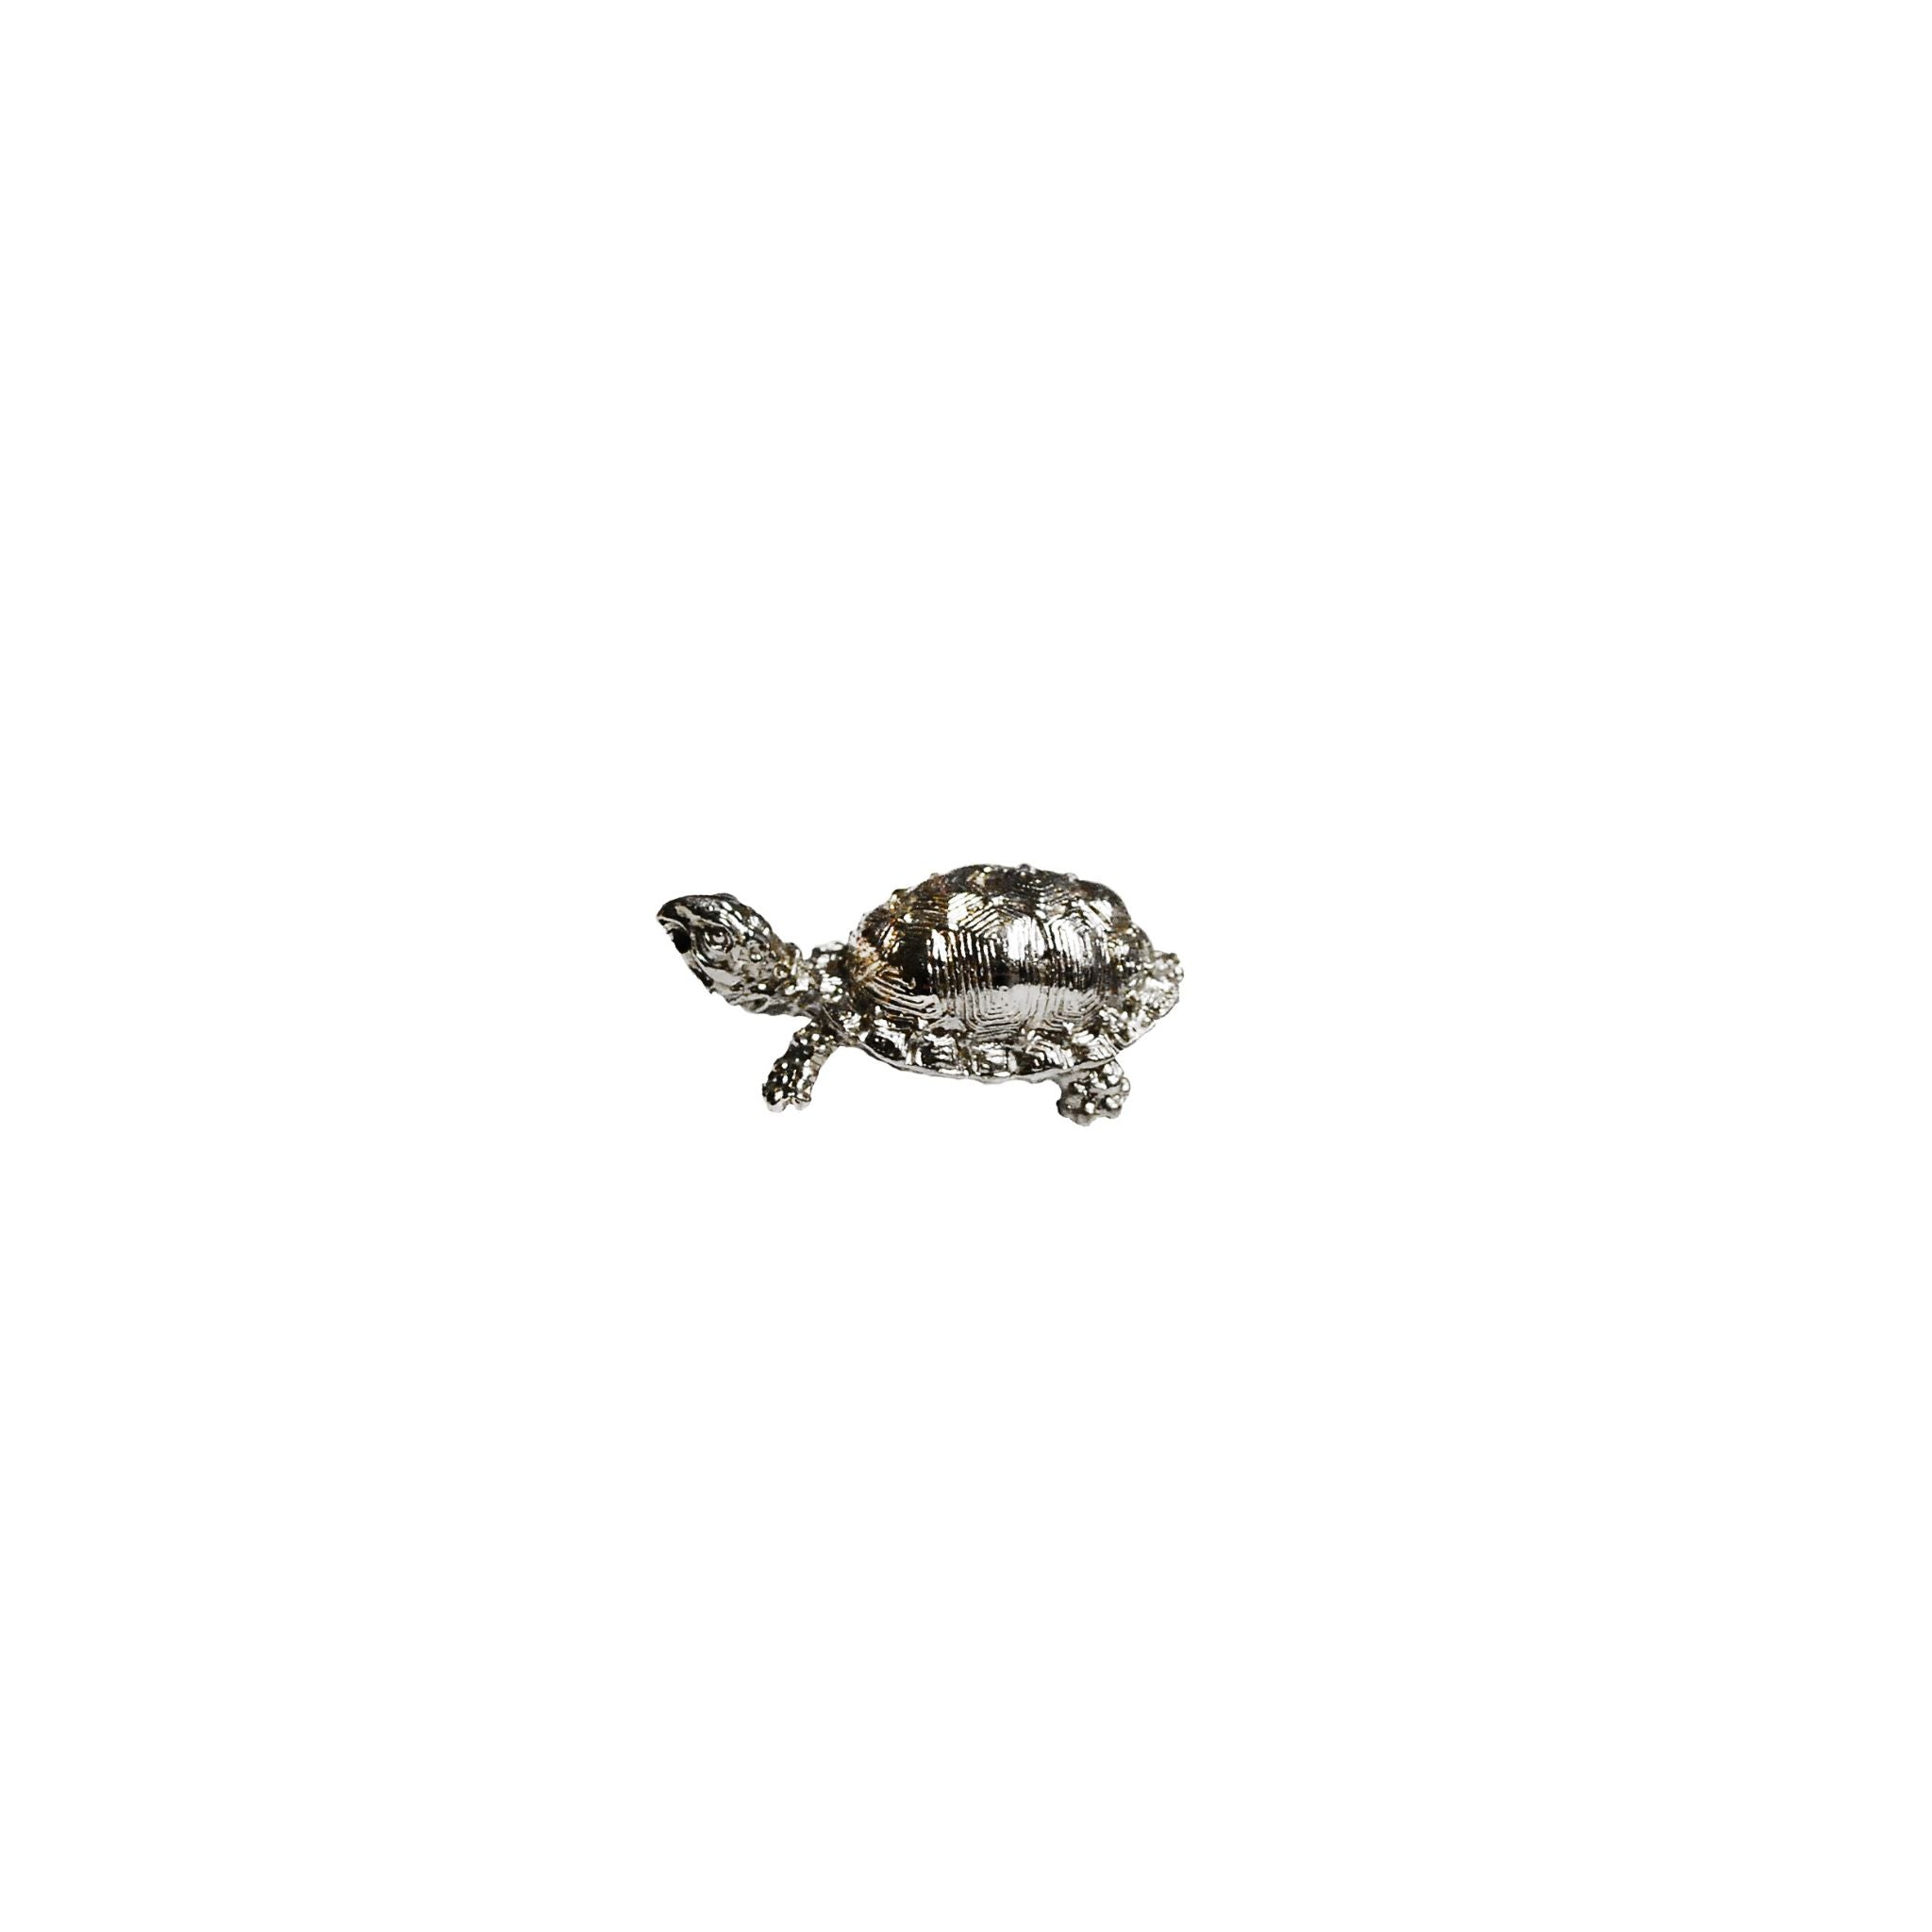 Small brass knob shaped like a turtle, with detailed features and a polished finish, used for cabinets, drawers, and doors.